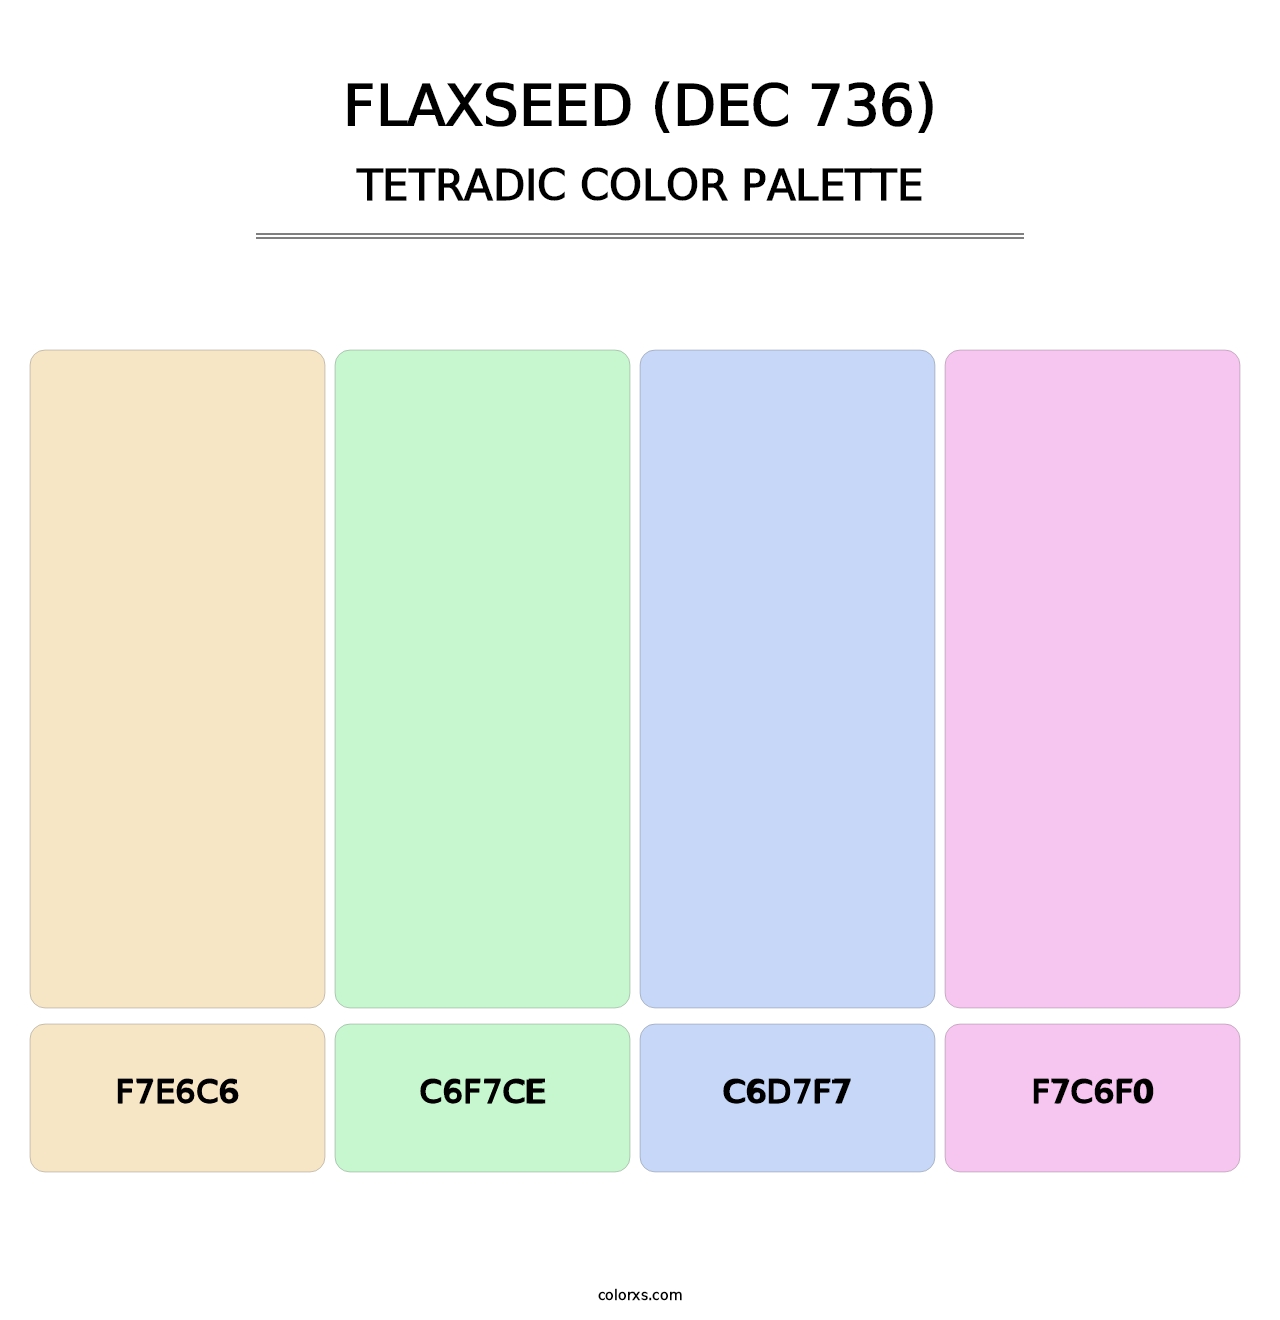 Flaxseed (DEC 736) - Tetradic Color Palette